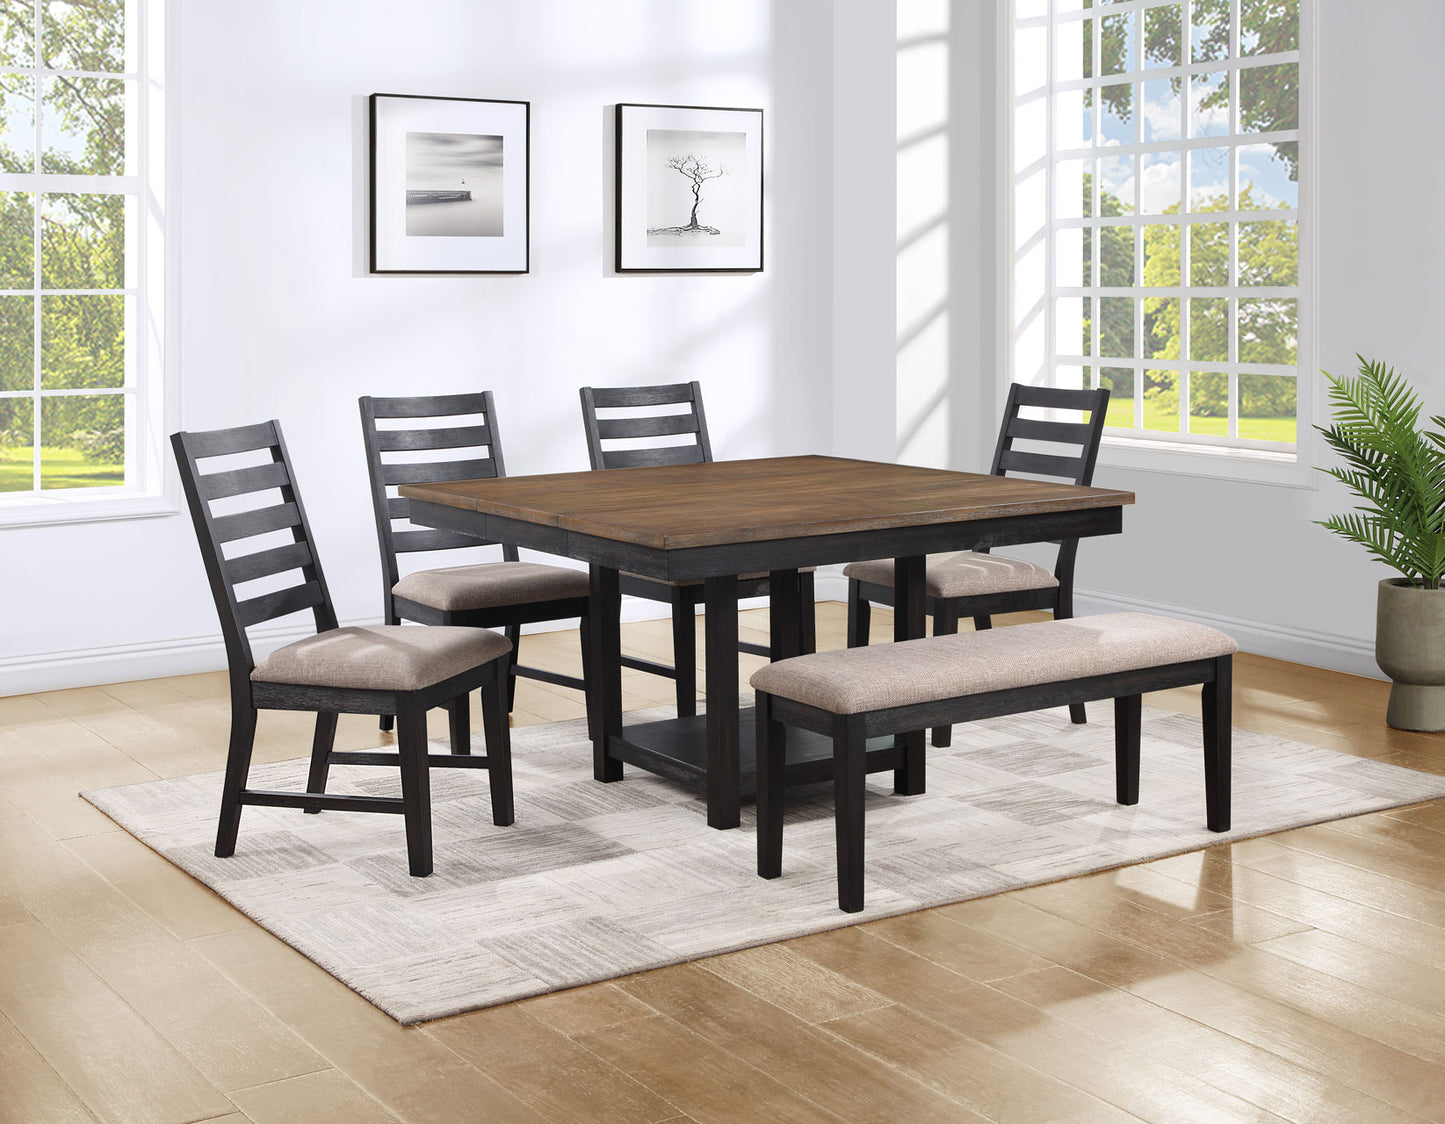 Harington 6-Piece Dining Set
(Table,Bench & 4 Side Chairs)